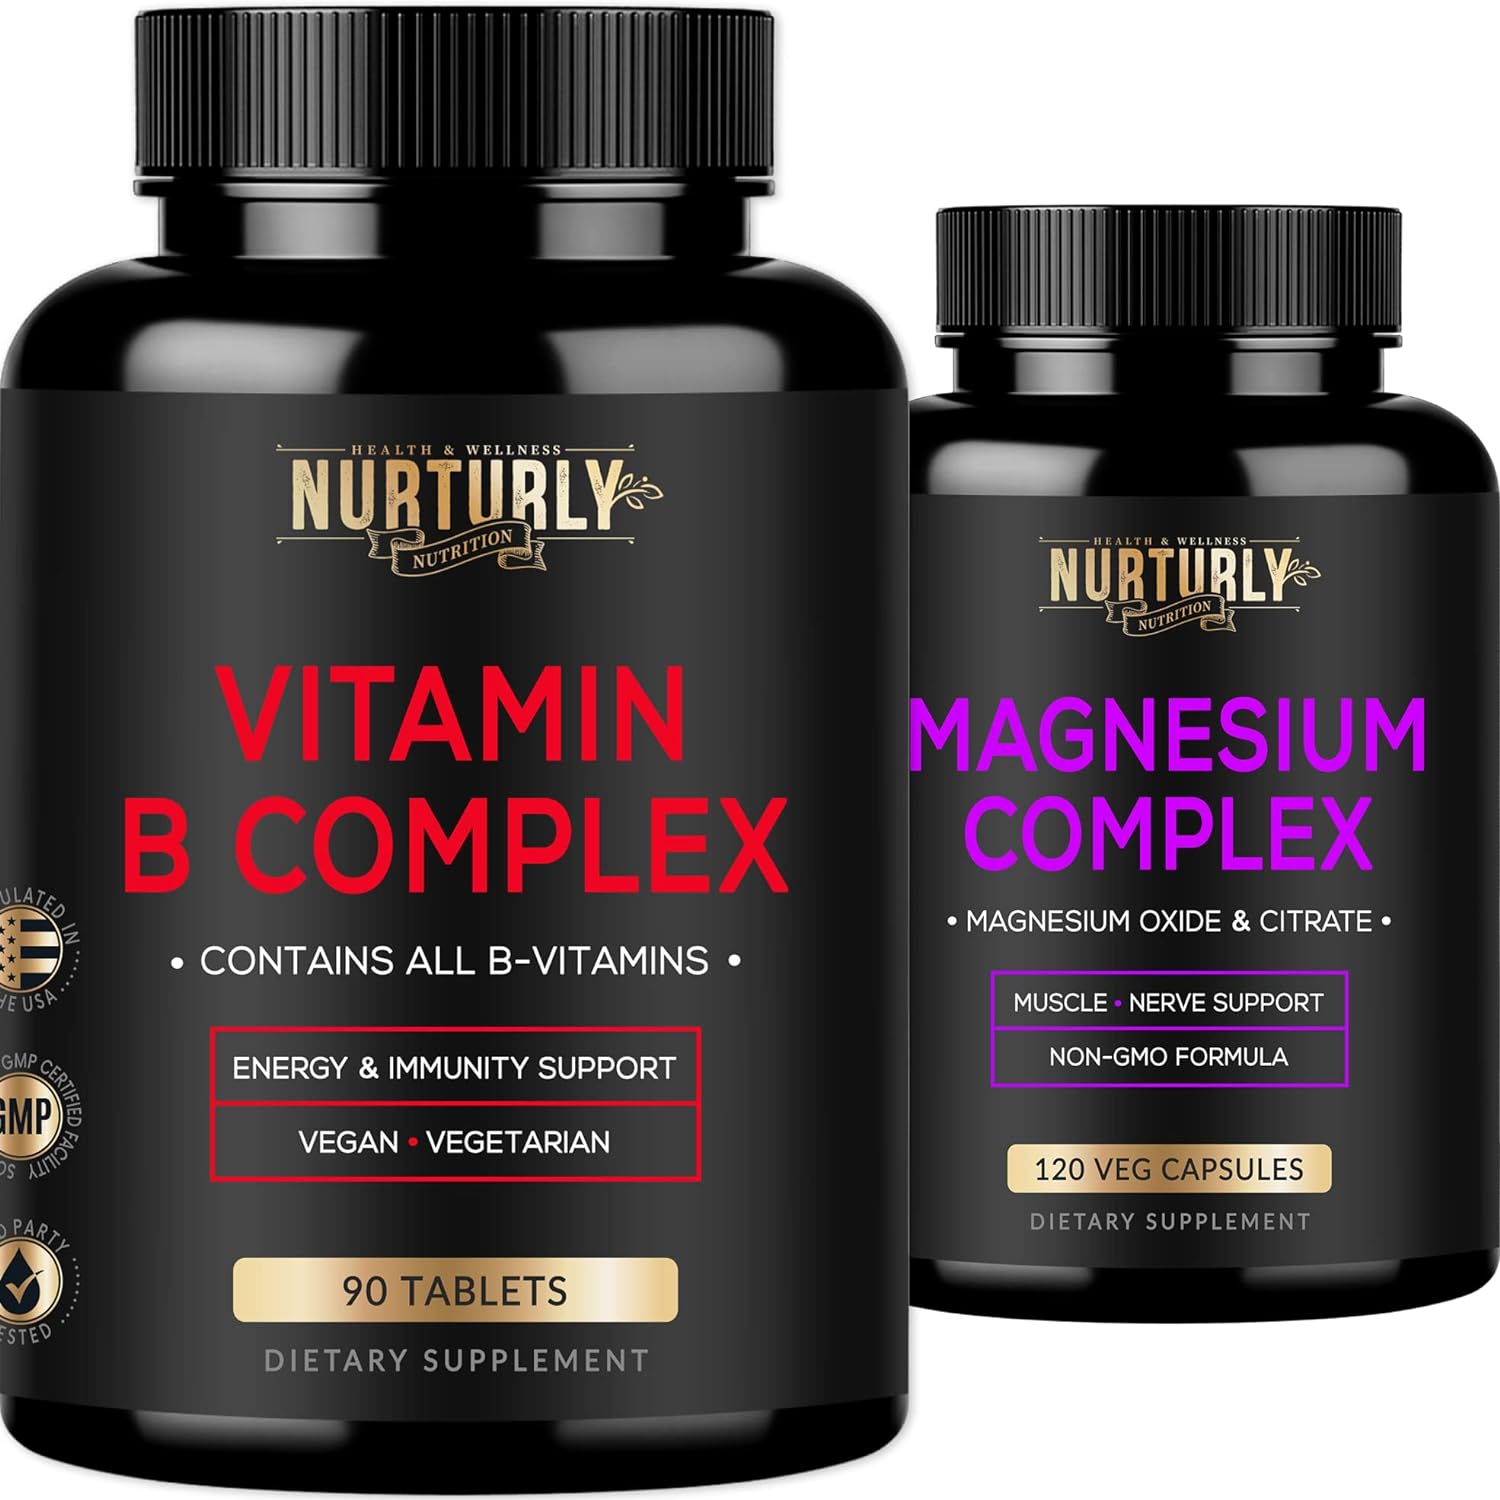 NURTURLY Magnesium and Vitamin B Complex - Magnesium Citrate 500MG - B Vitamins B1,B2,B3,B5,B6,B7,B9,B12 and Biotin - Muscle Relaxatio, Sleep and Energy, Immunity and Mood Support